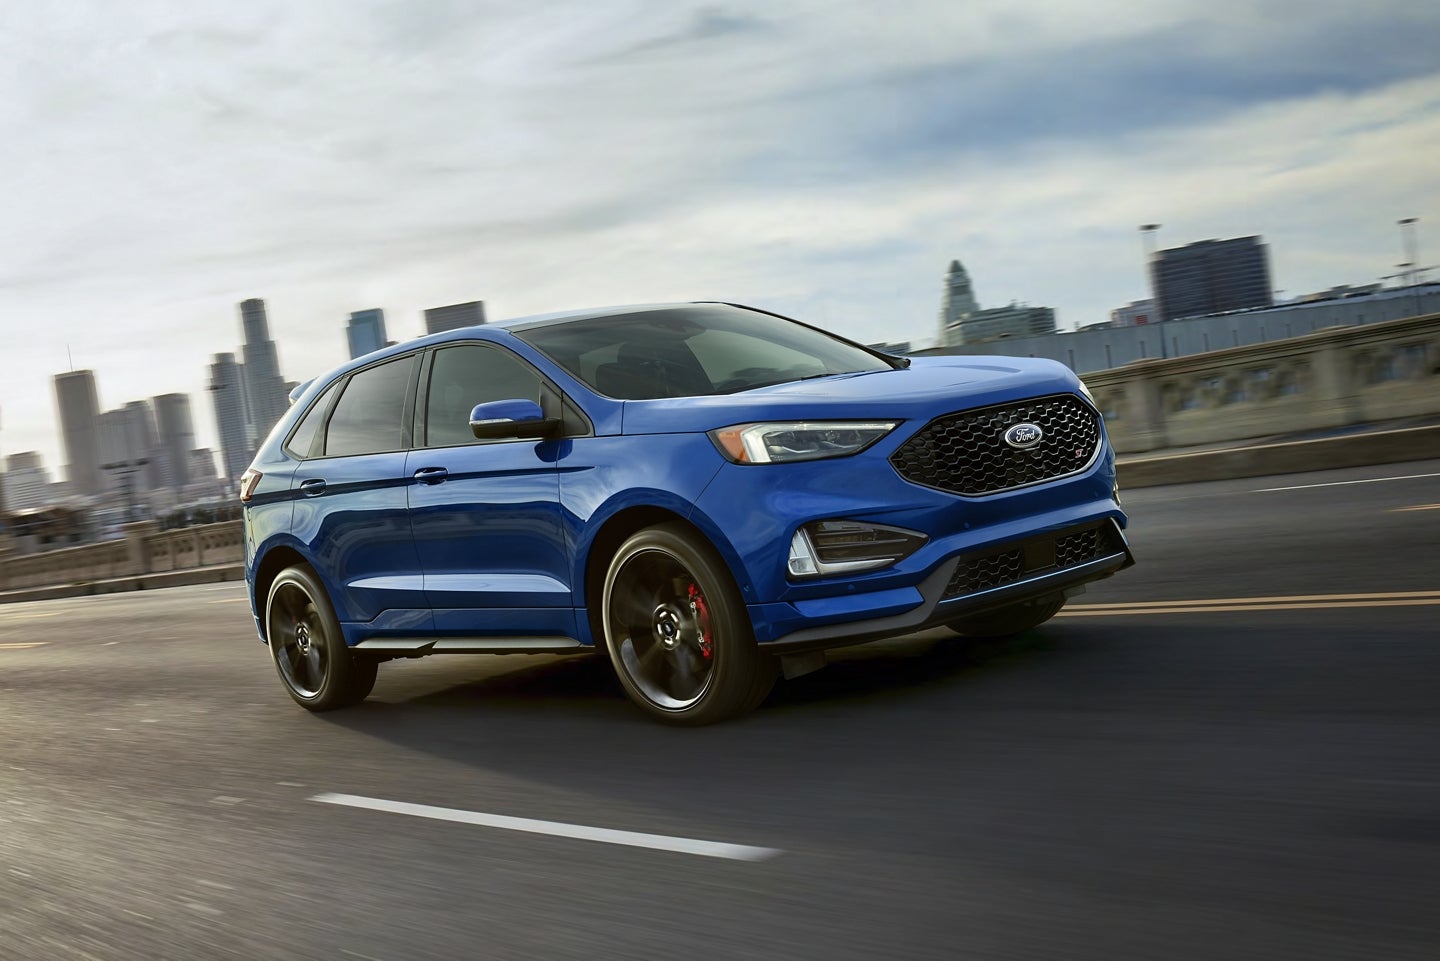 Used Ford Edge for Sale near Fort Rucker, AL